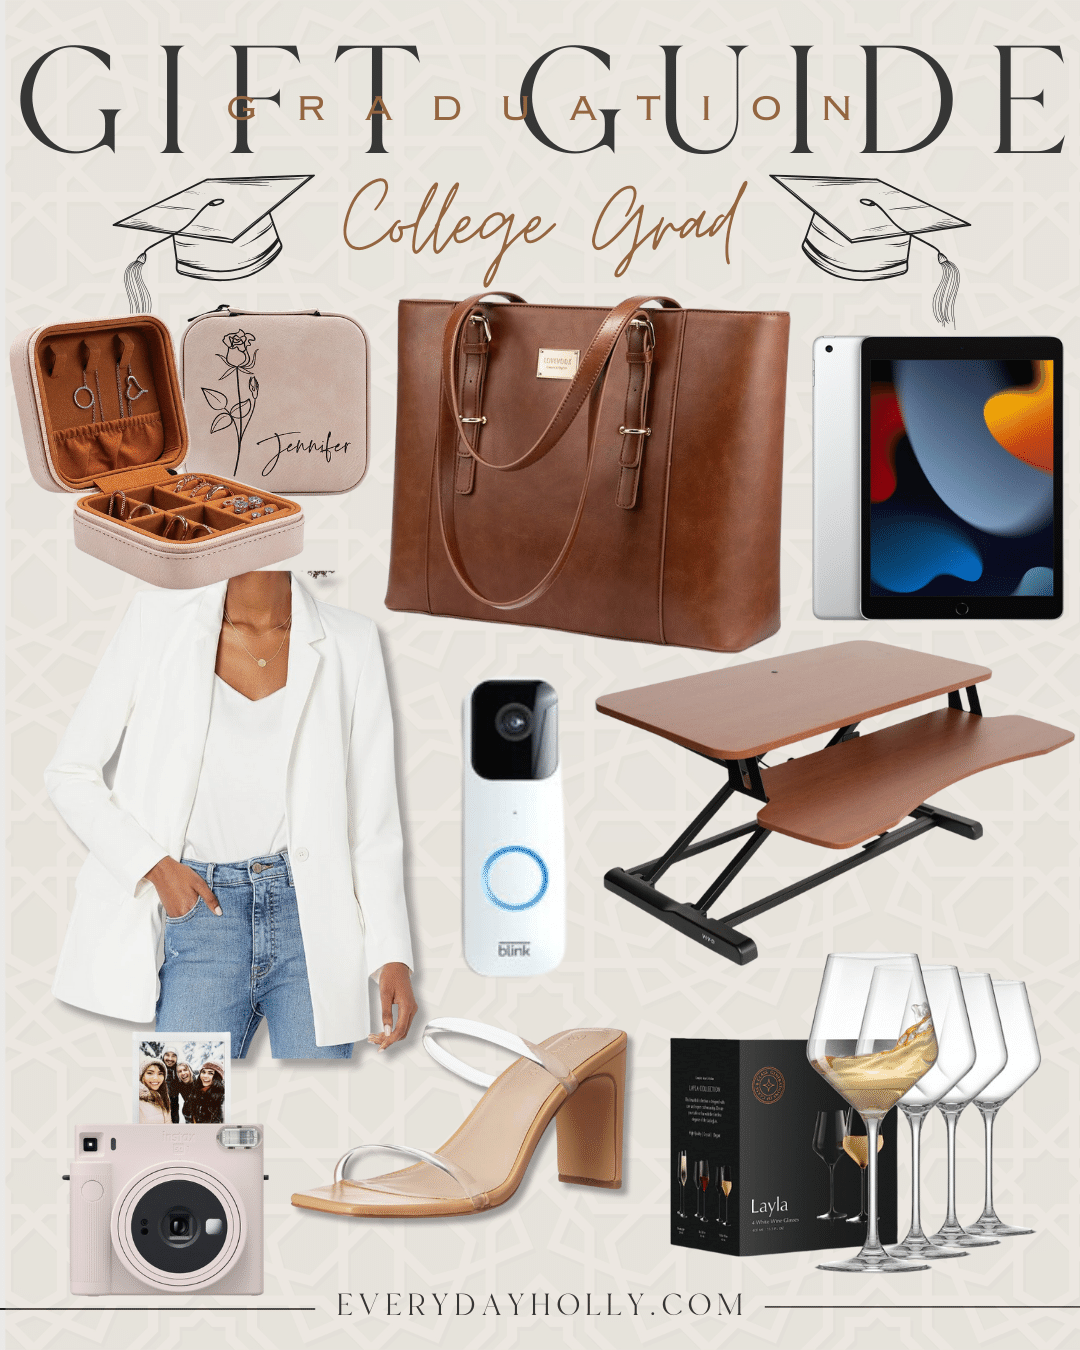 45 gift ideas for the graduate in your life | gift guide, gift ideas, graduation gift, graduate, high school grad, college grad, blazer, workwear essentials, electronics, standing desk, heels, wine glass, gifts for her